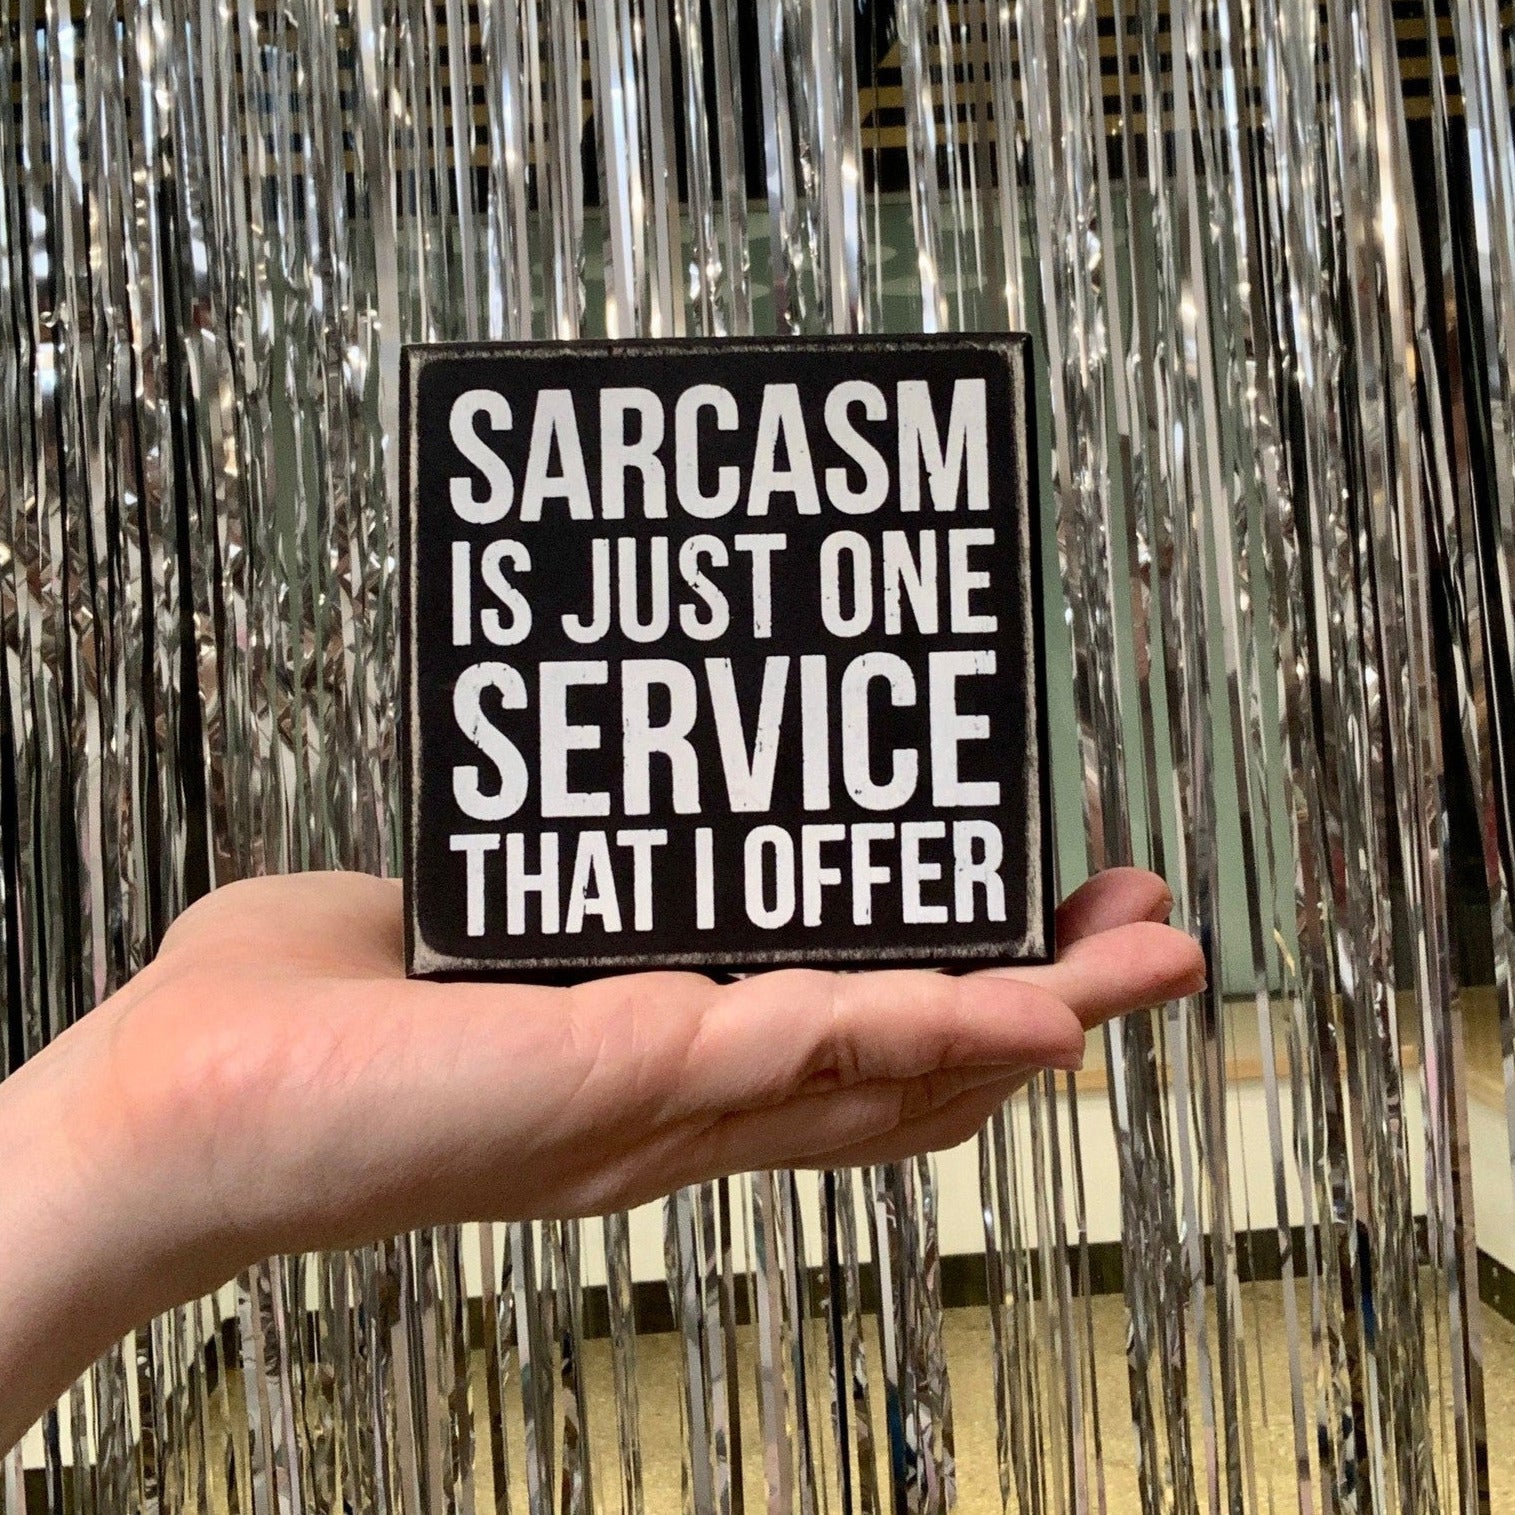 Sarcasm Is Just One Service That I Offer Mini Box Sign in Wood with White Lettering